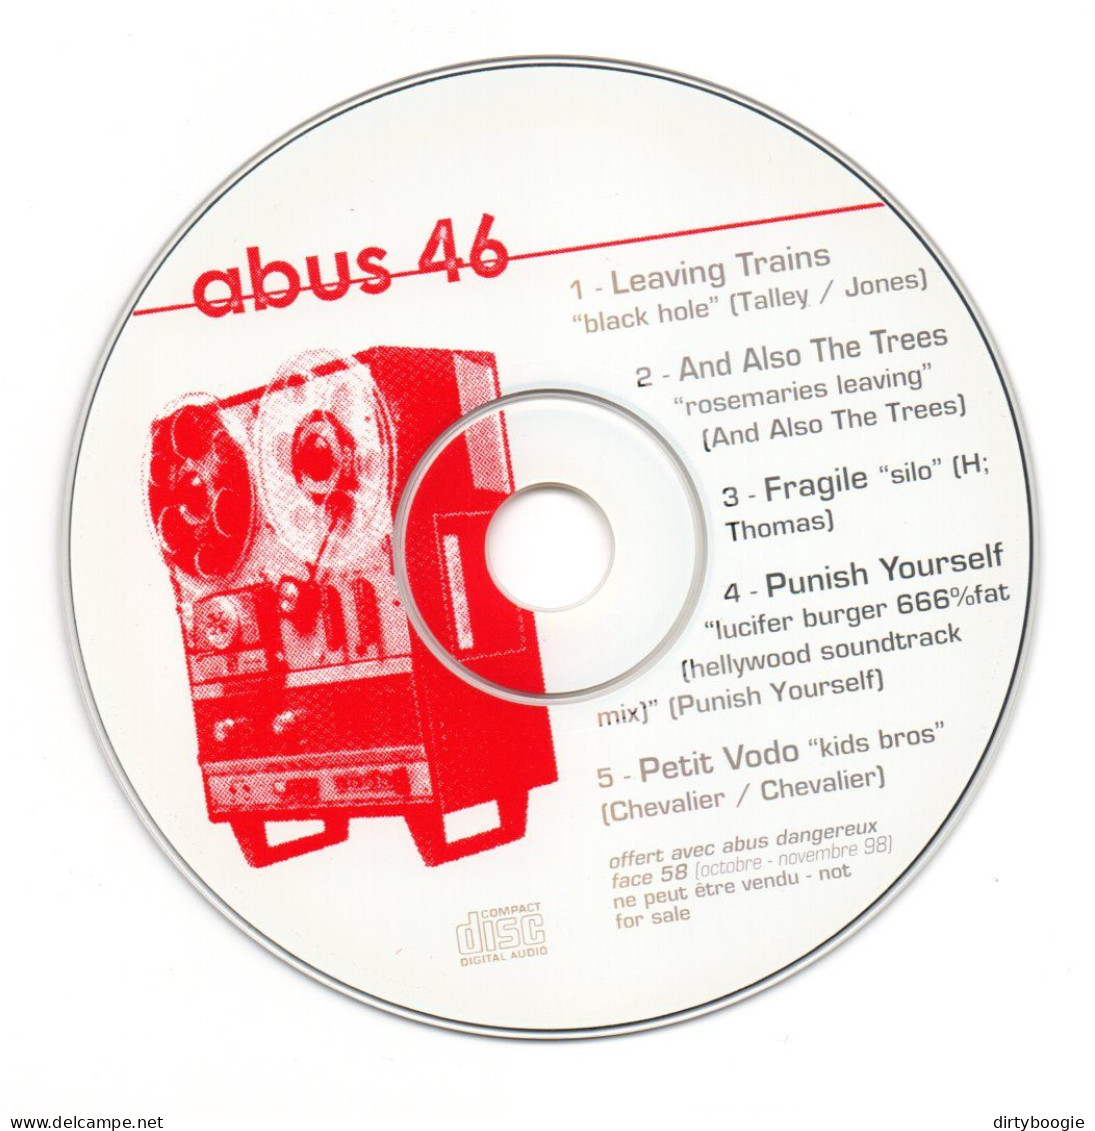 Abus 46 - CD - Abus Dangereux - And Also The Trees - Punish Yourself - Petit Vodo - Compilations